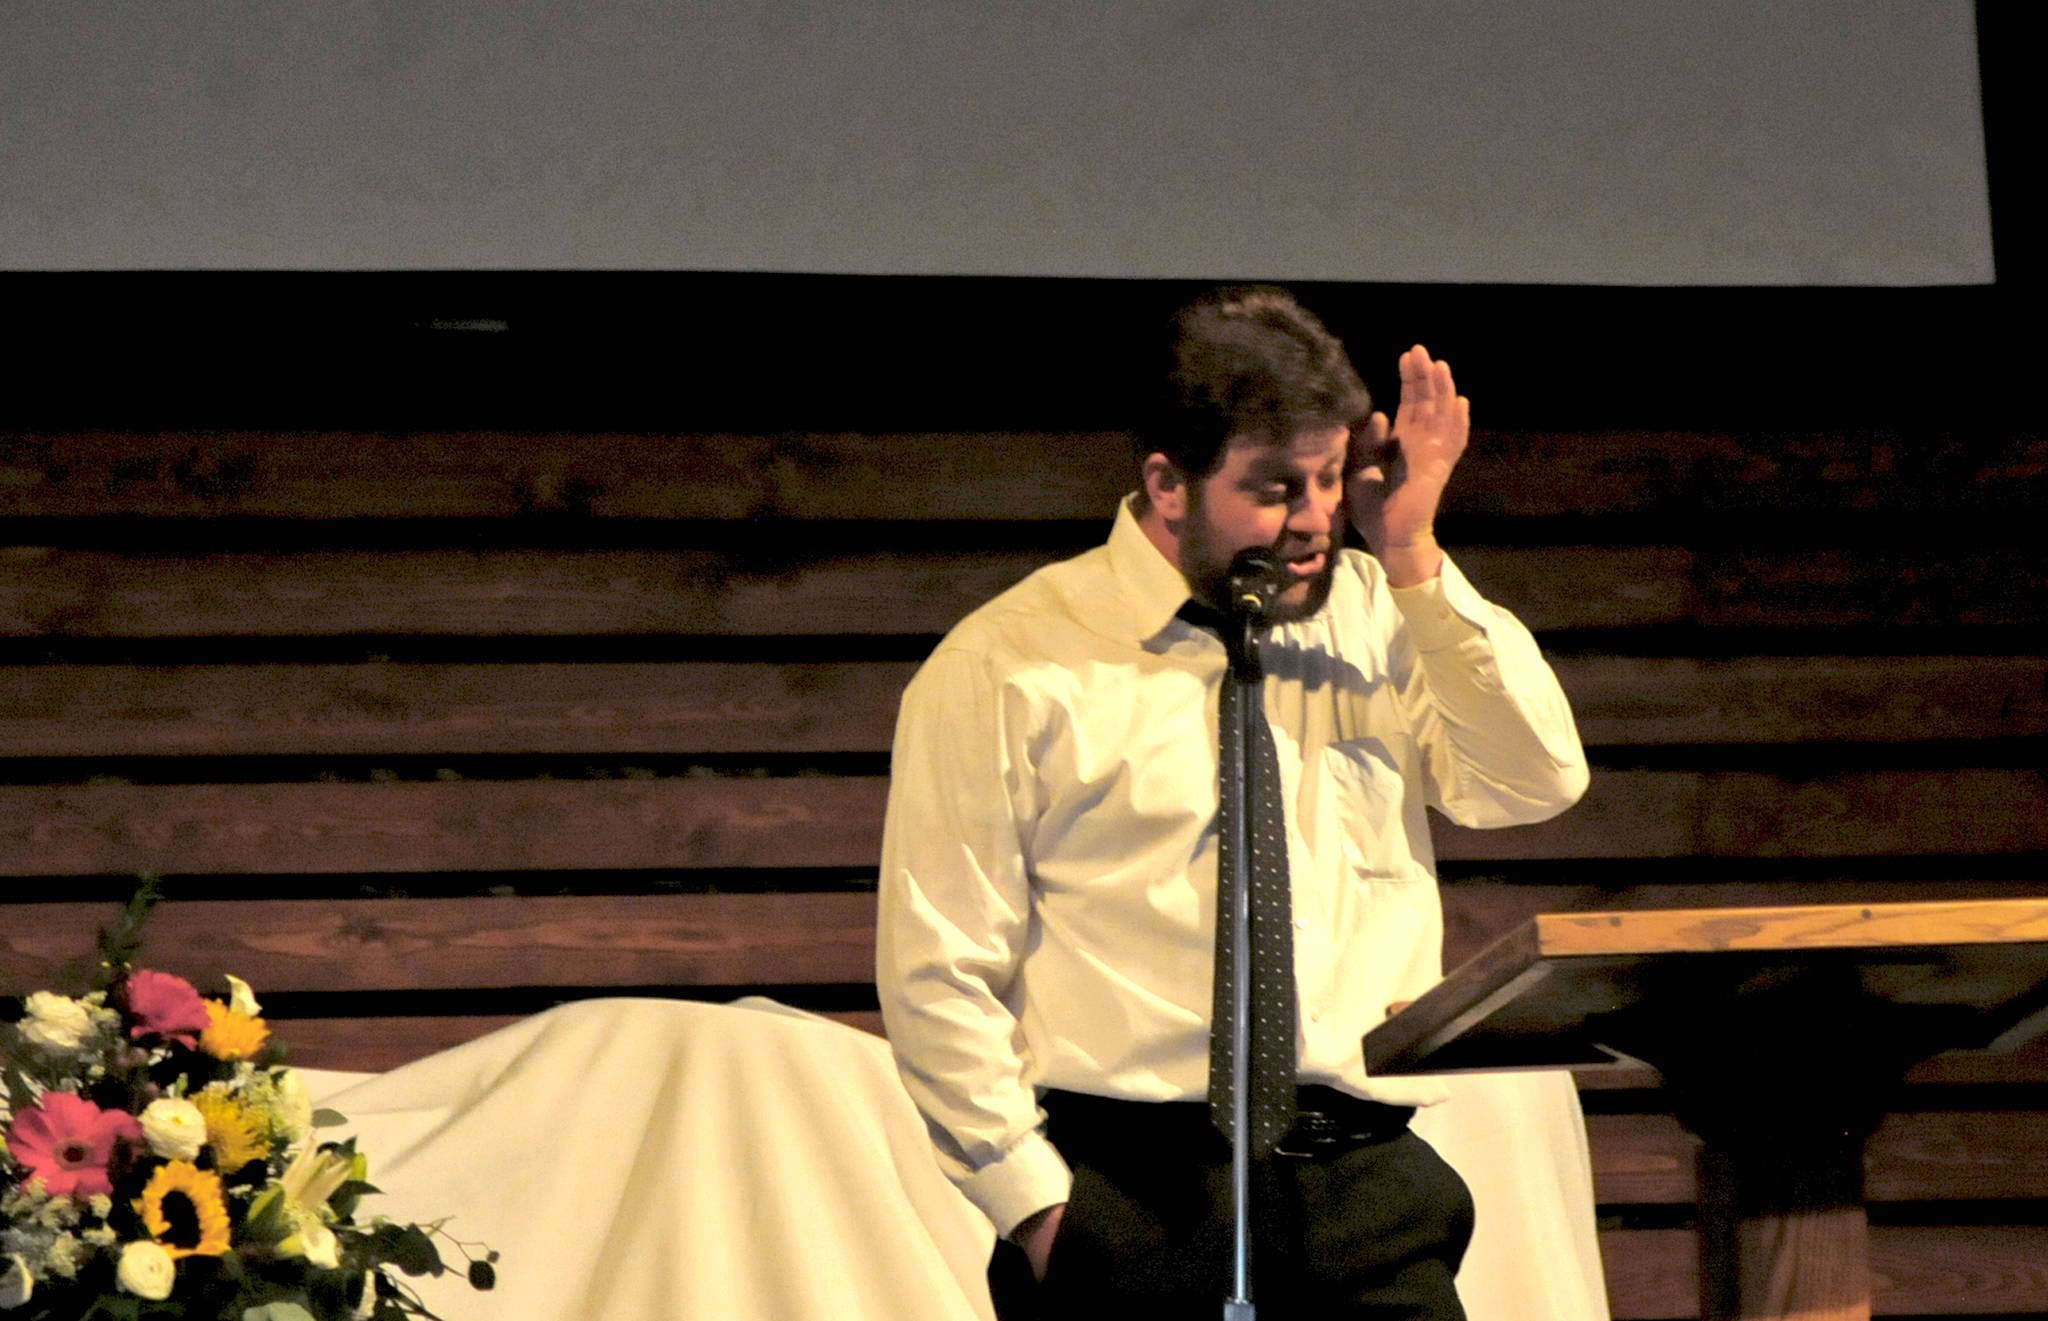 Criss Adams wipes his eyes while giving a eulogy for Travis Stubblefield at Peninsula Grace Brethren Church on Saturday, June 30, 2018 near Soldotna, Alaska. Stubblefield, a lifelong resident of the Soldotna area, was killed June 21 in a conflict in Kasilof. Alaska State Troopers are investigating the circumstances of his death, though no charges have yet been filed. (Photo by Elizabeth Earl/Peninsula Clarion)